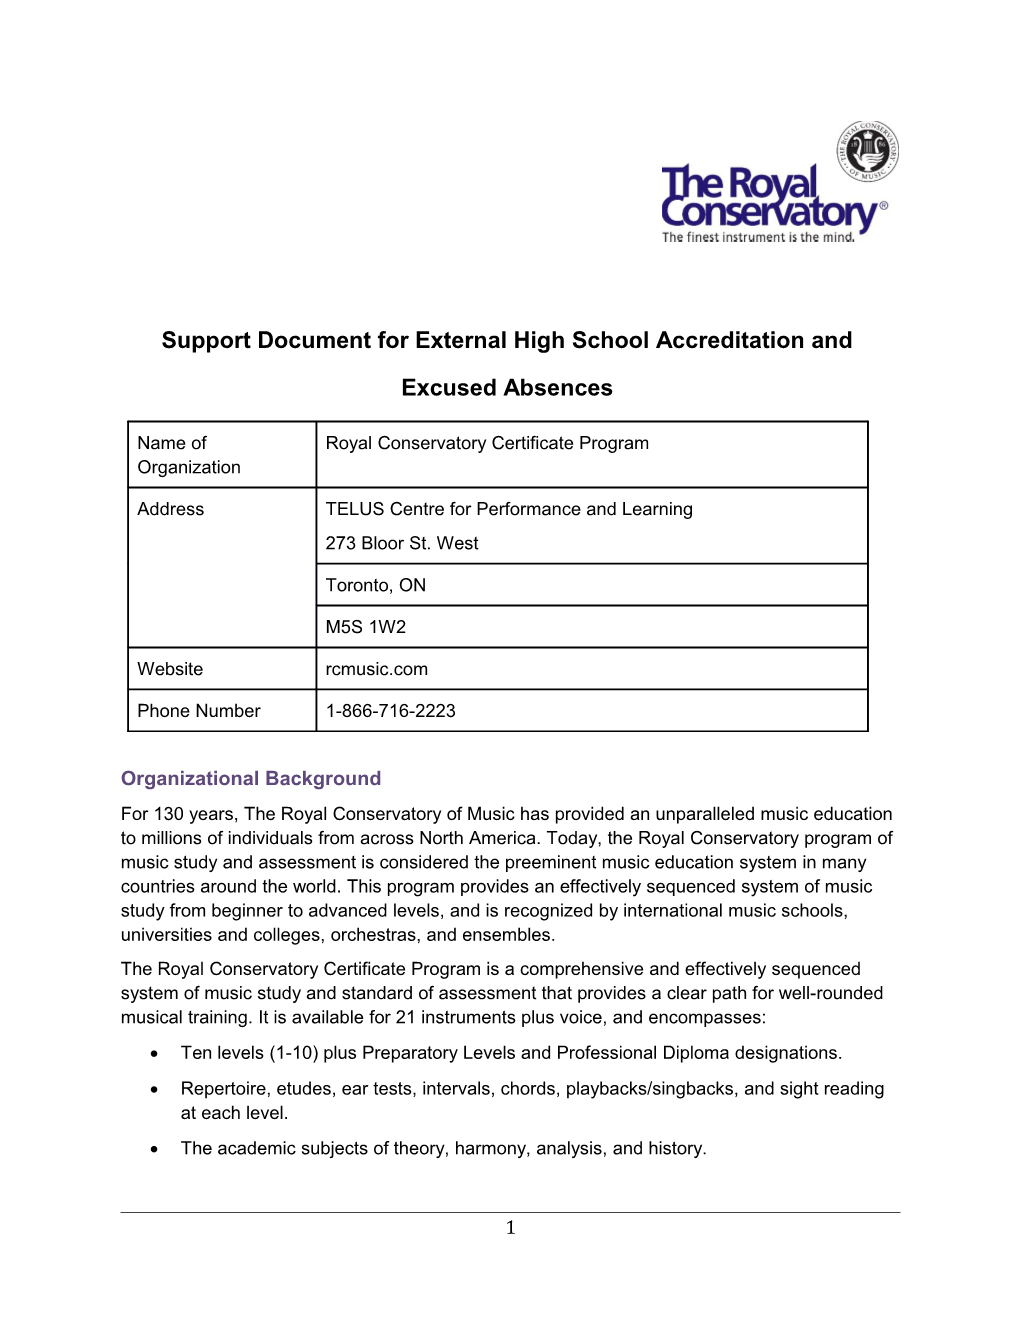 Support Document for External High School Accreditation And